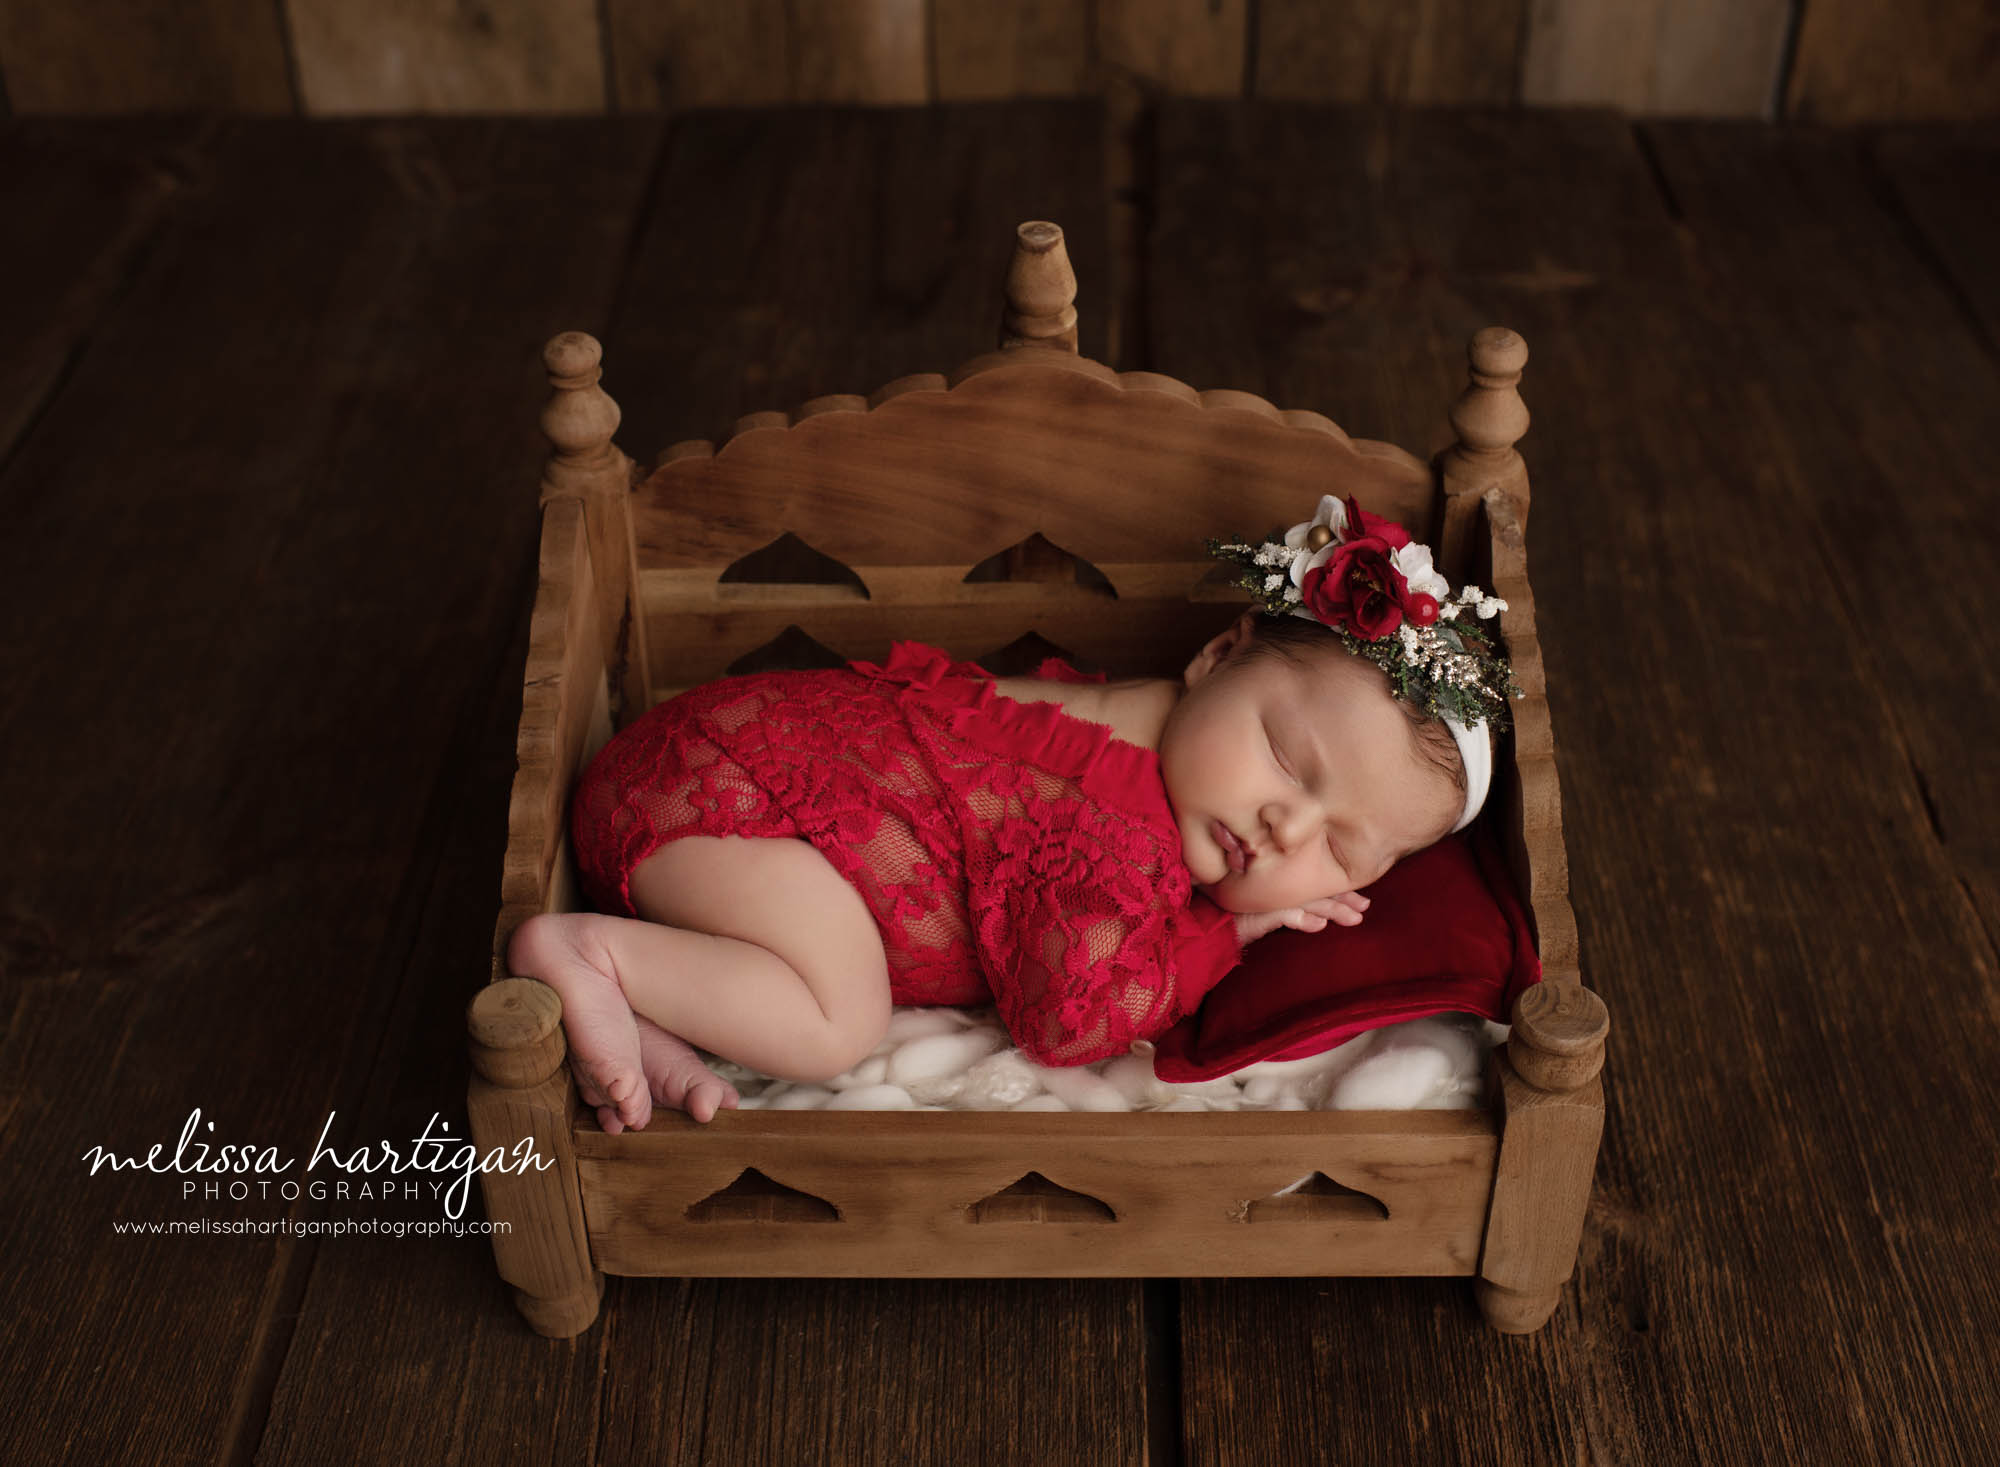 baby girl posed in wooden bed prop with red lace newborn romper and red green and white headband in holiday set up